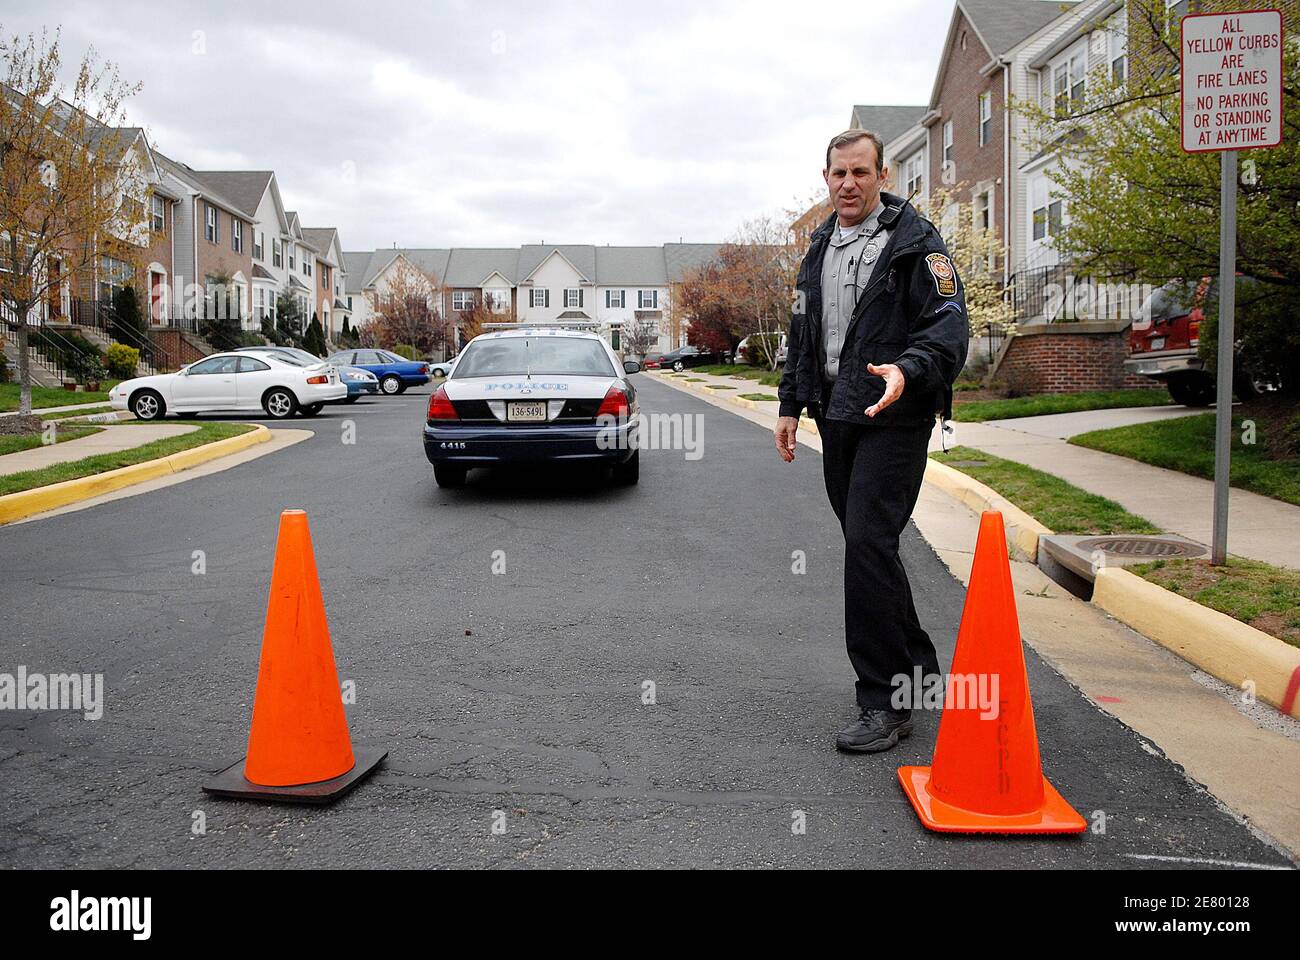 A Fairfax County Policeman patrols with his car in front of the townhouse listed as Cho Seung-Hui's address in Centreville, VA, USA on April 18, 2007. Officials have named Seung-Hui, the 23-year-old South Korean native, as the suspect in the killing rampage at Virginia Tech yesterday killing 32 and self. Photo by Olivier Douliery/ABACAPRESS.COM Stock Photo